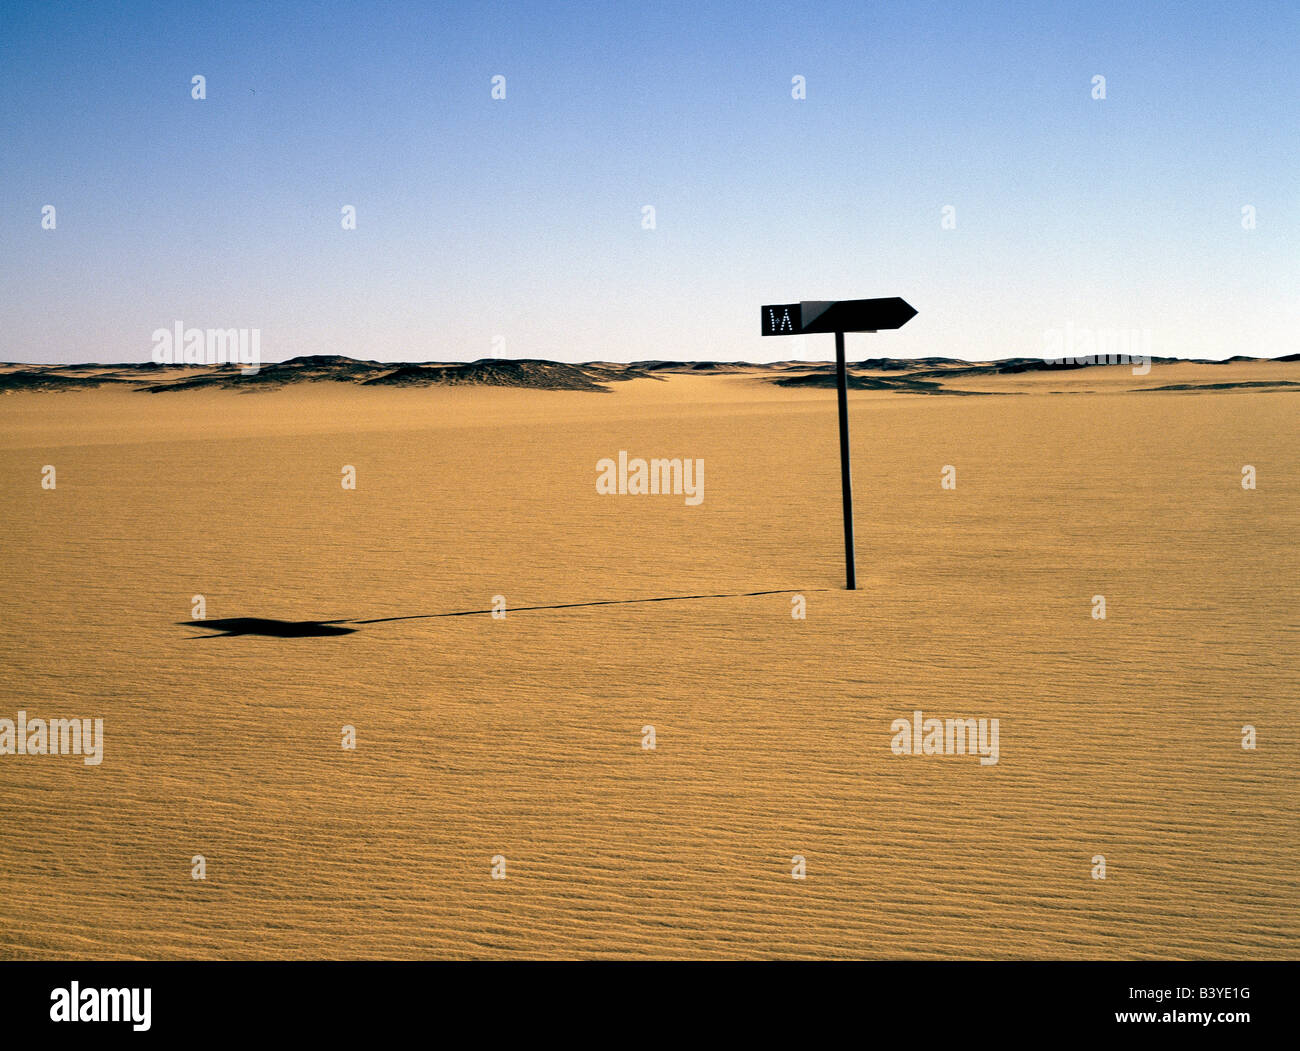 Sudan, An old signpost marks a disused track across the Nubian Desert, north of Old Dongola. It is marked in Arabic '108', which is probably the mileage from Karima to Dongola. The route across the desert now runs at least 10 km away from the sign. Stock Photo